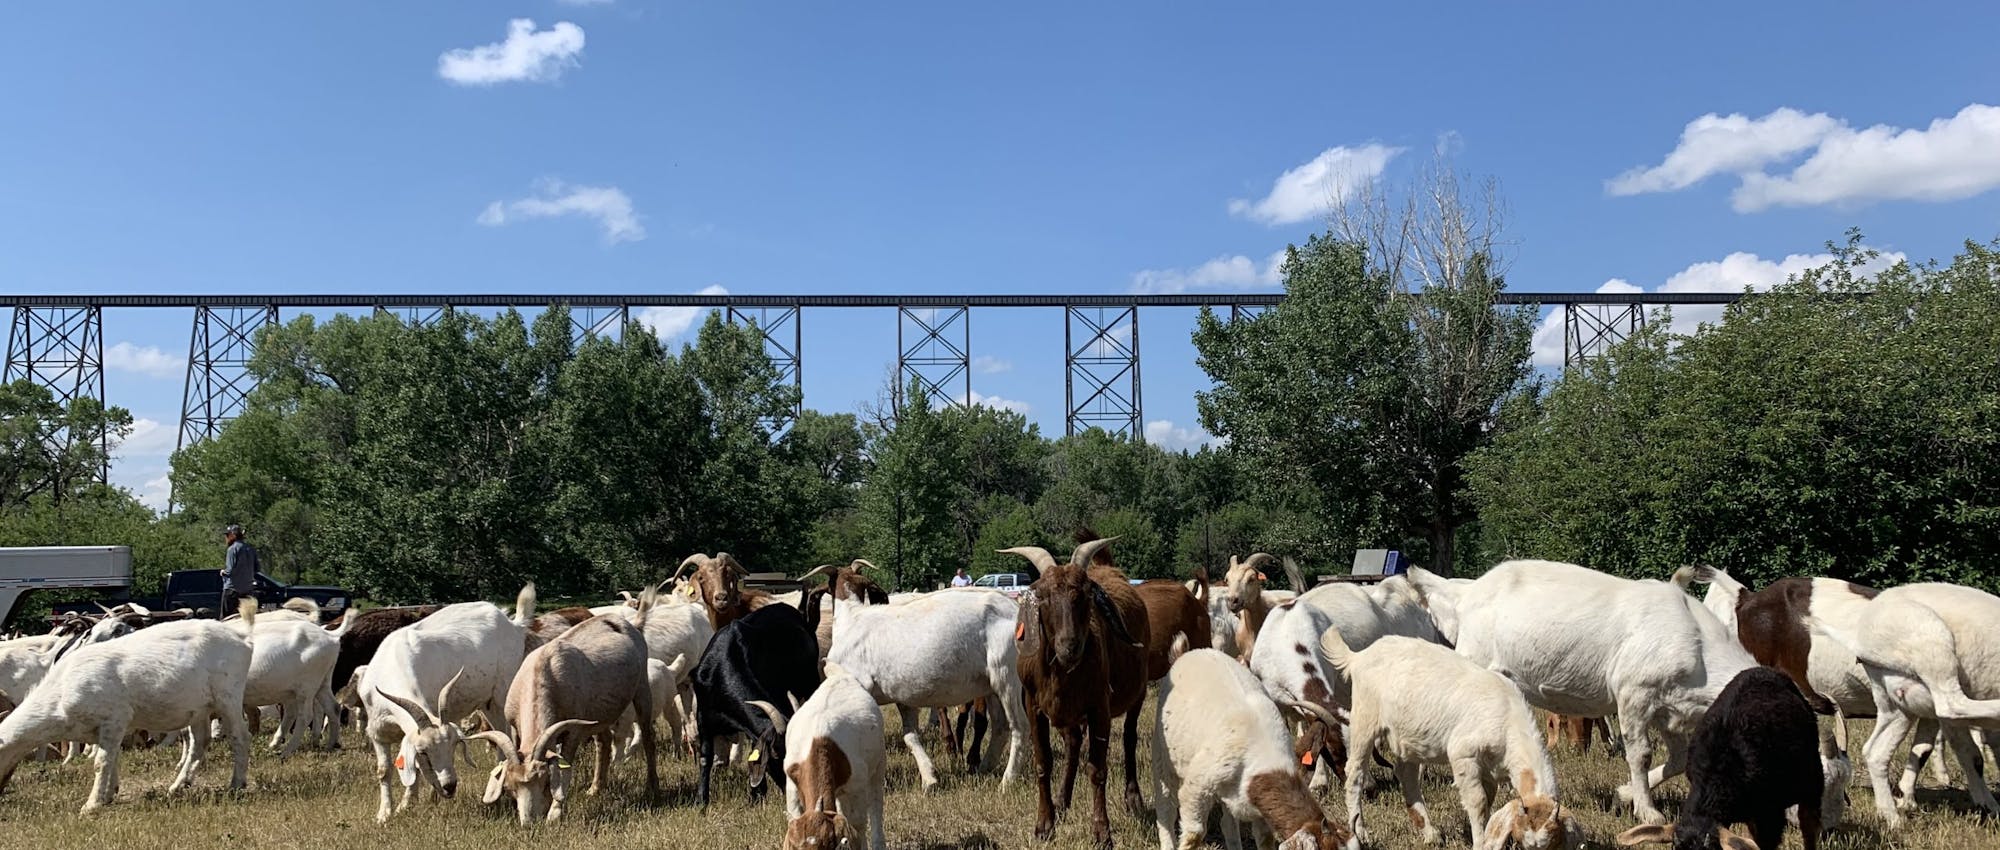 A large group of goats grazing